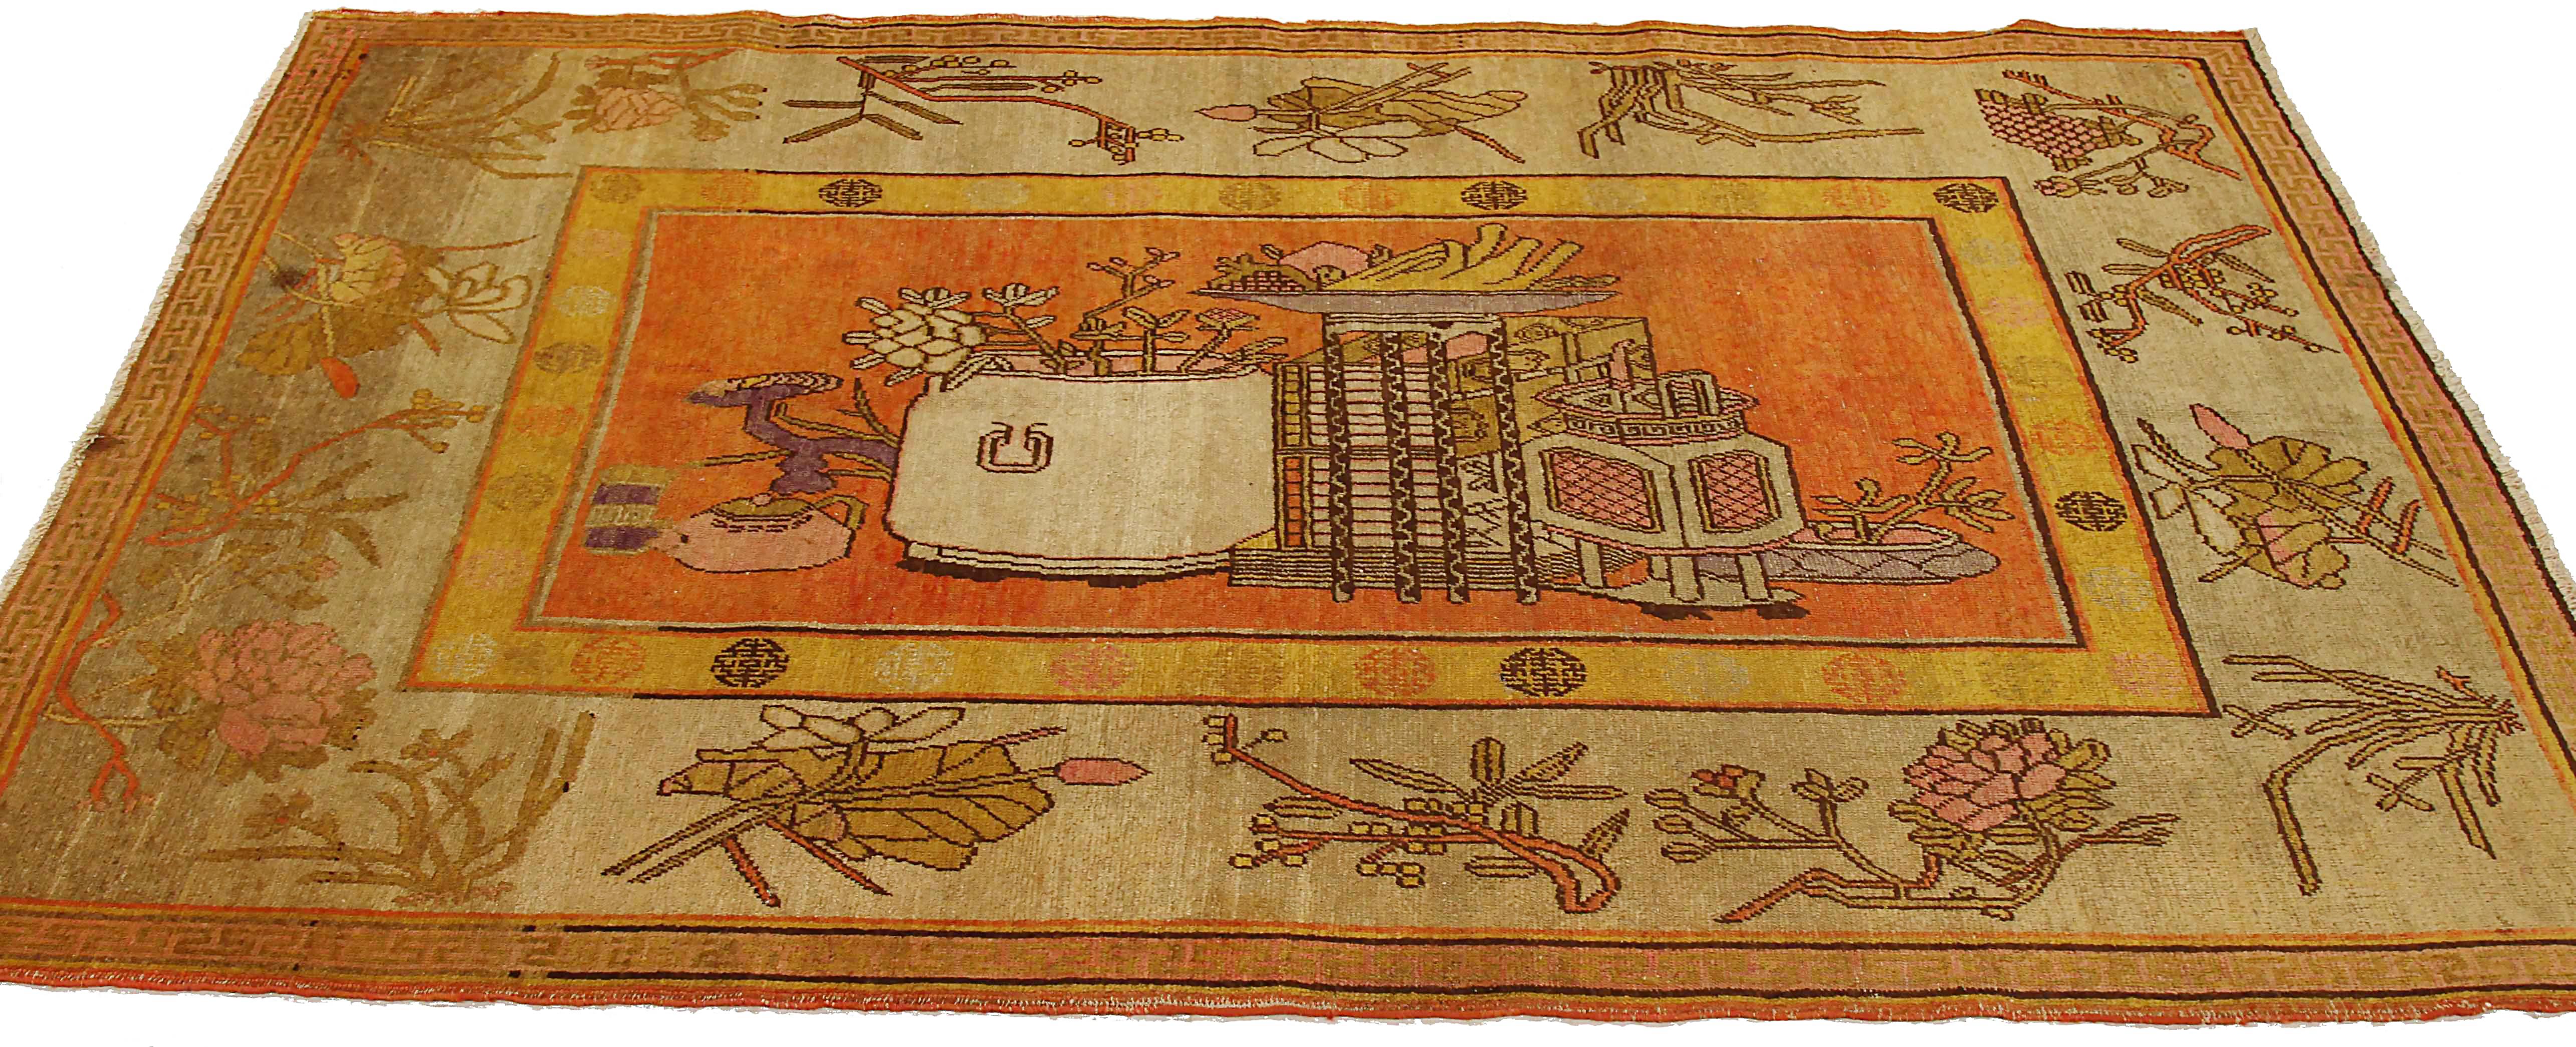 Antique Russian area rug handwoven from the finest sheep’s wool. It’s colored with all-natural vegetable dyes that are safe for humans and pets. It’s a traditional Khotan design handwoven by expert artisans. It’s a lovely area rug that can be